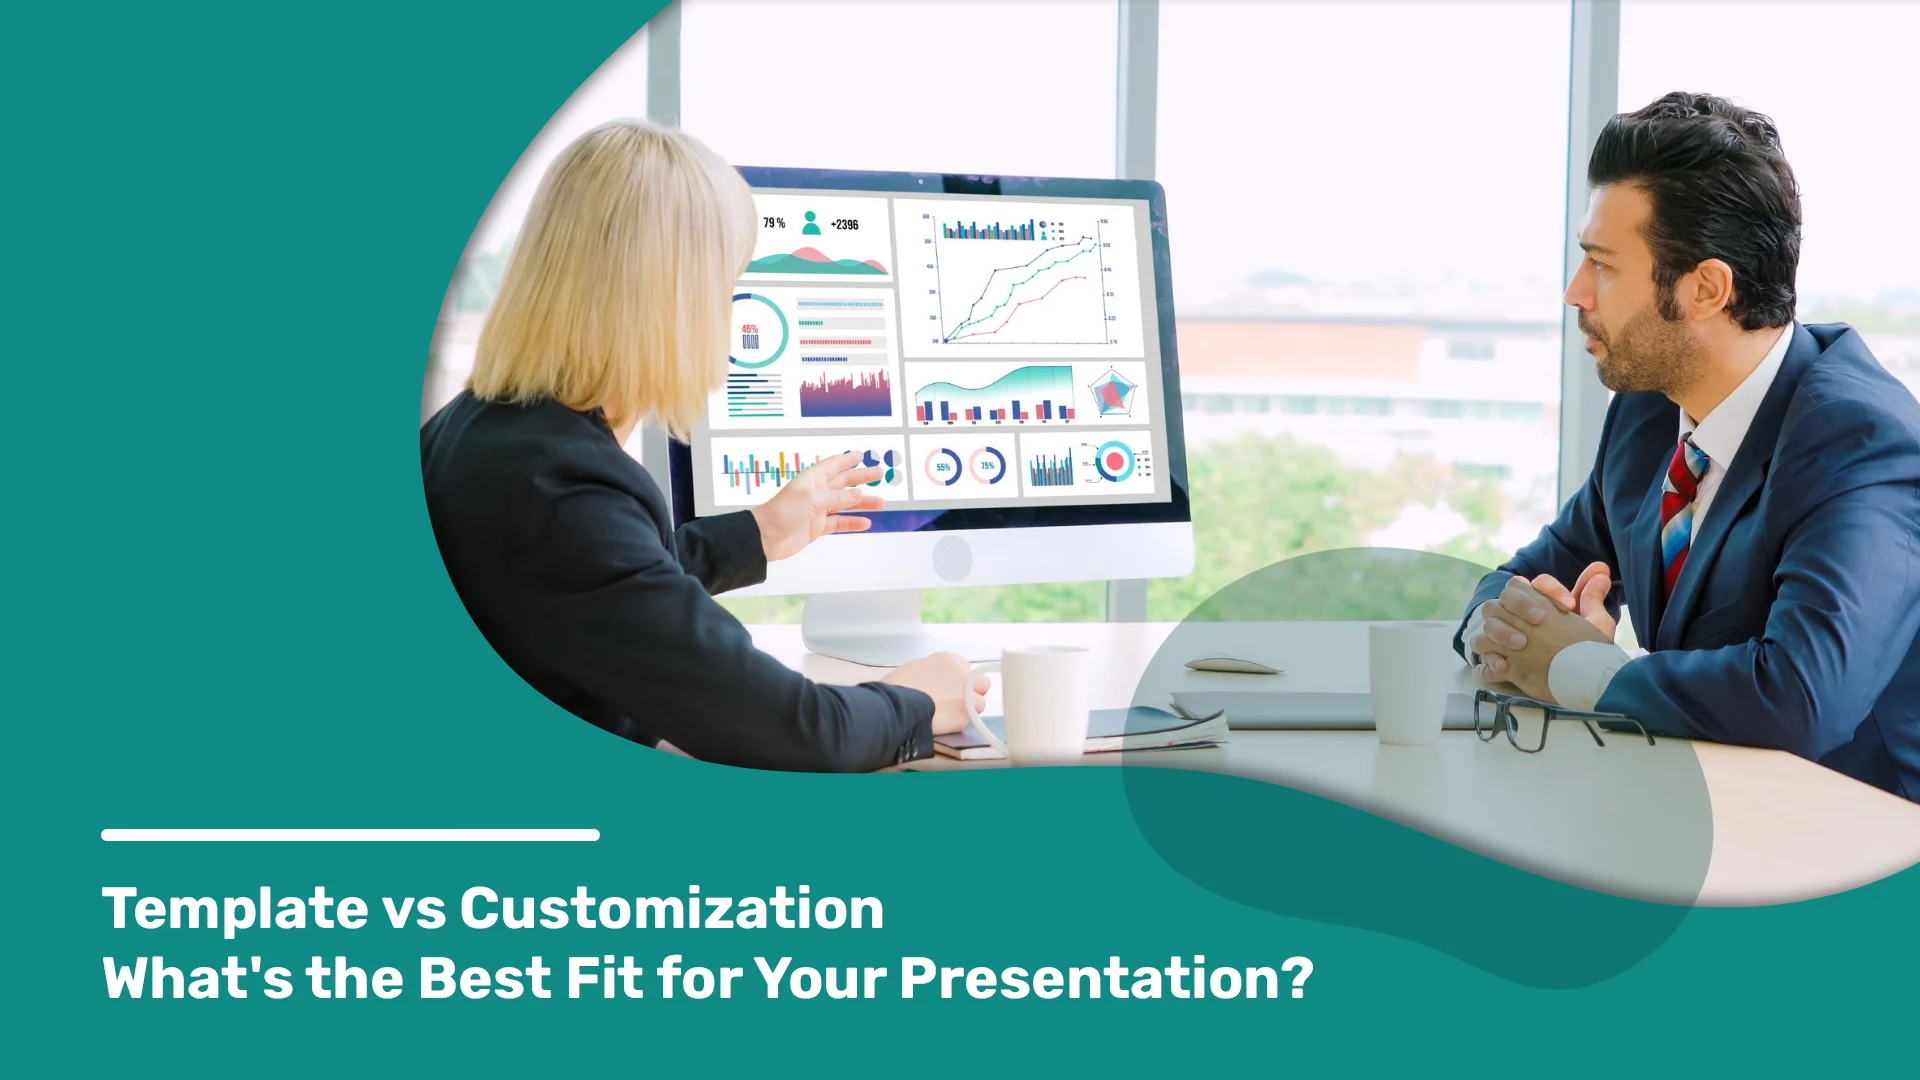 A Presentation designer explaining which is best for presentation Template or Customization